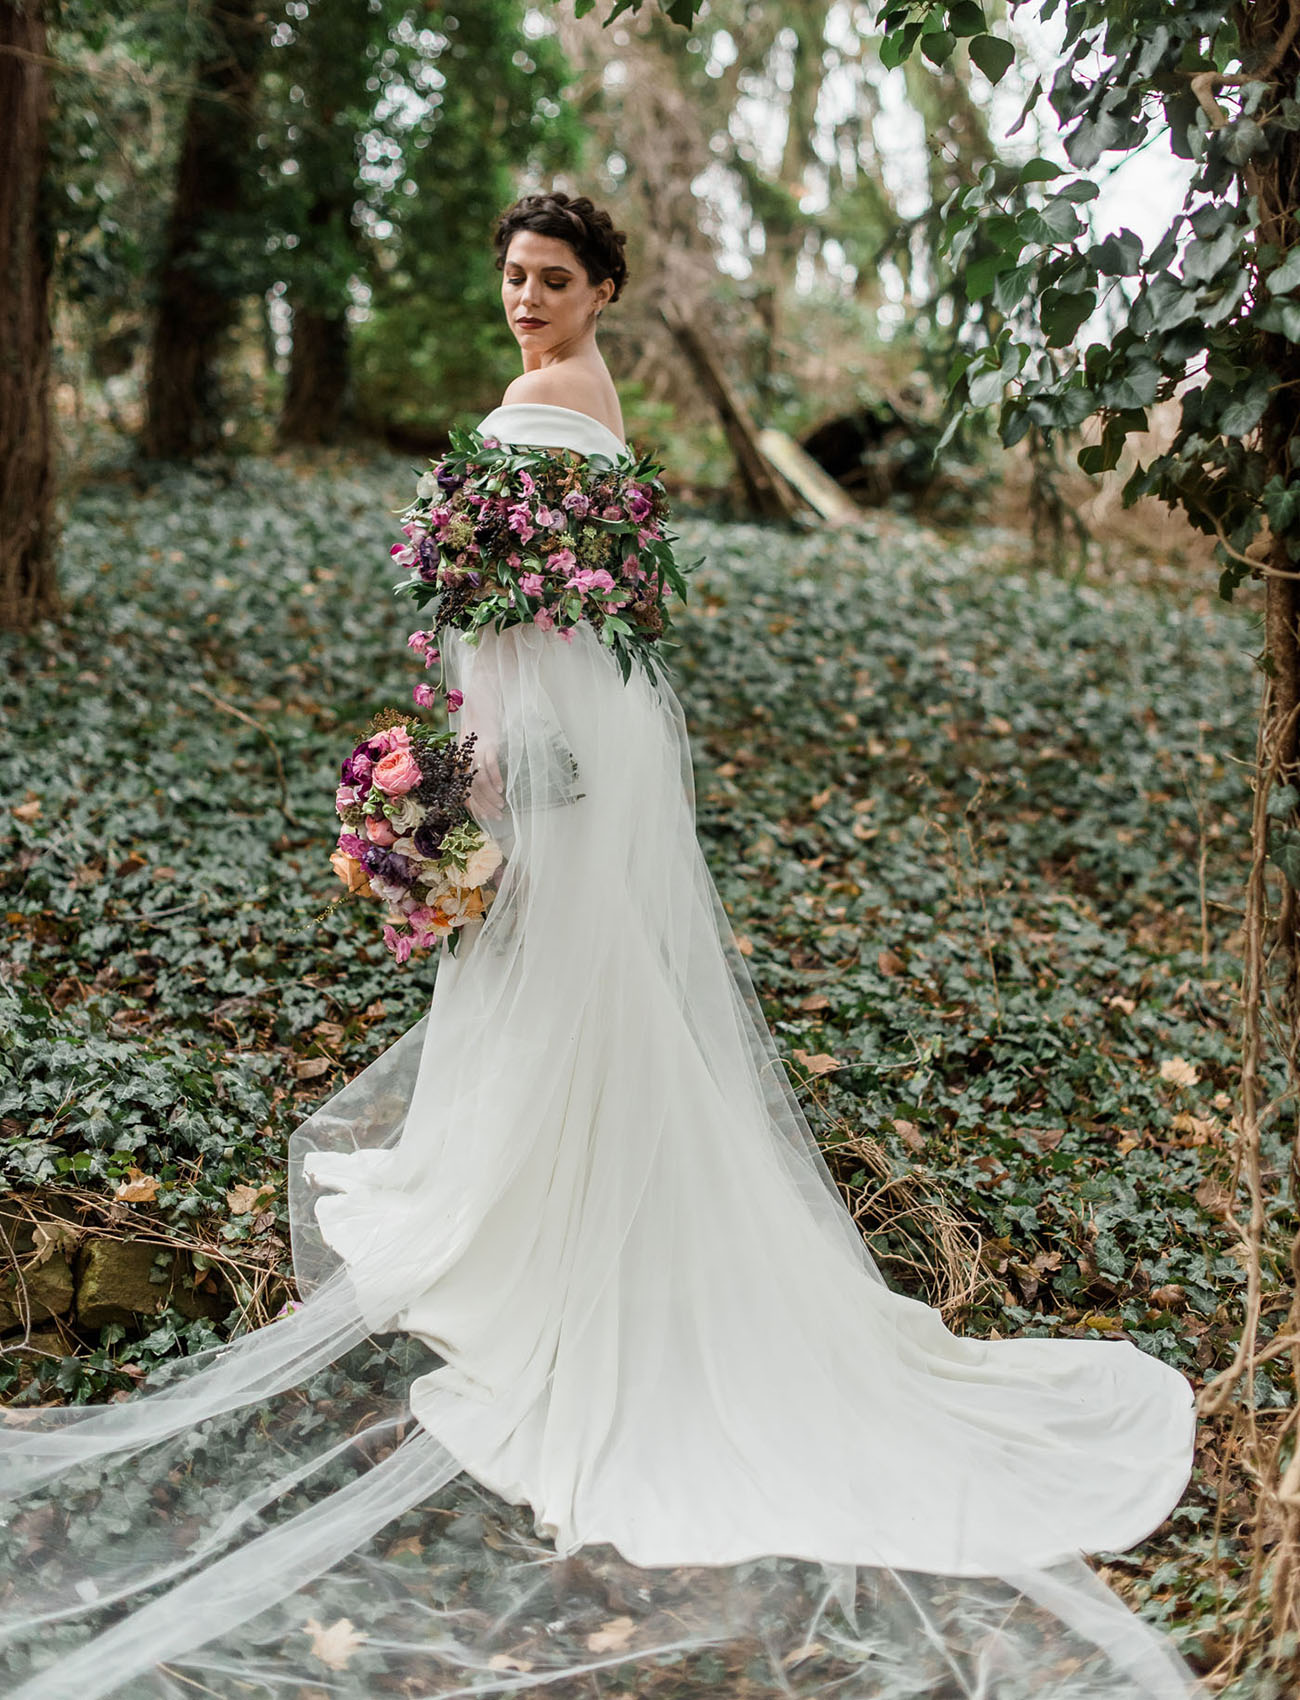 This wedding was inspired by Shakespeare and featured lush blooms and old world romance